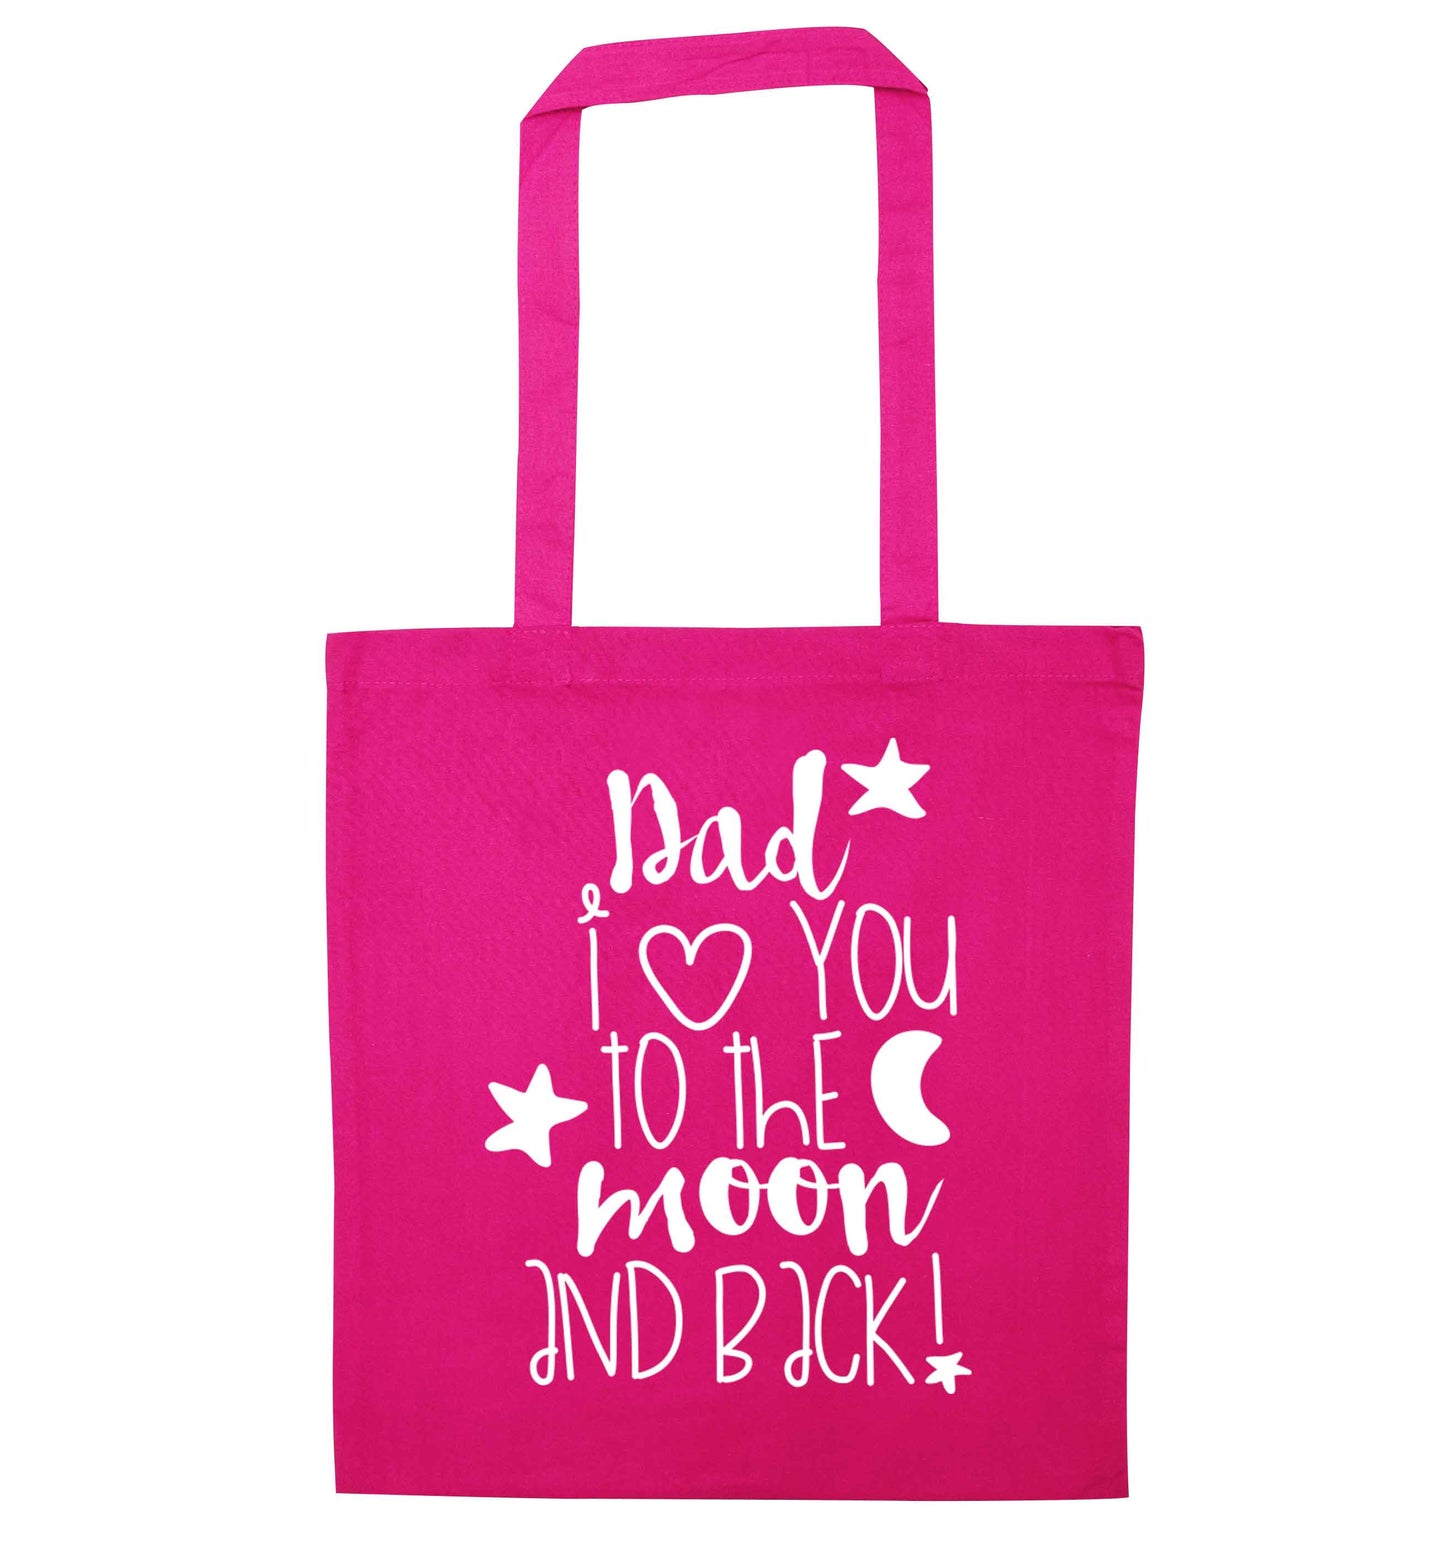 Dad I love you to the moon and back pink tote bag